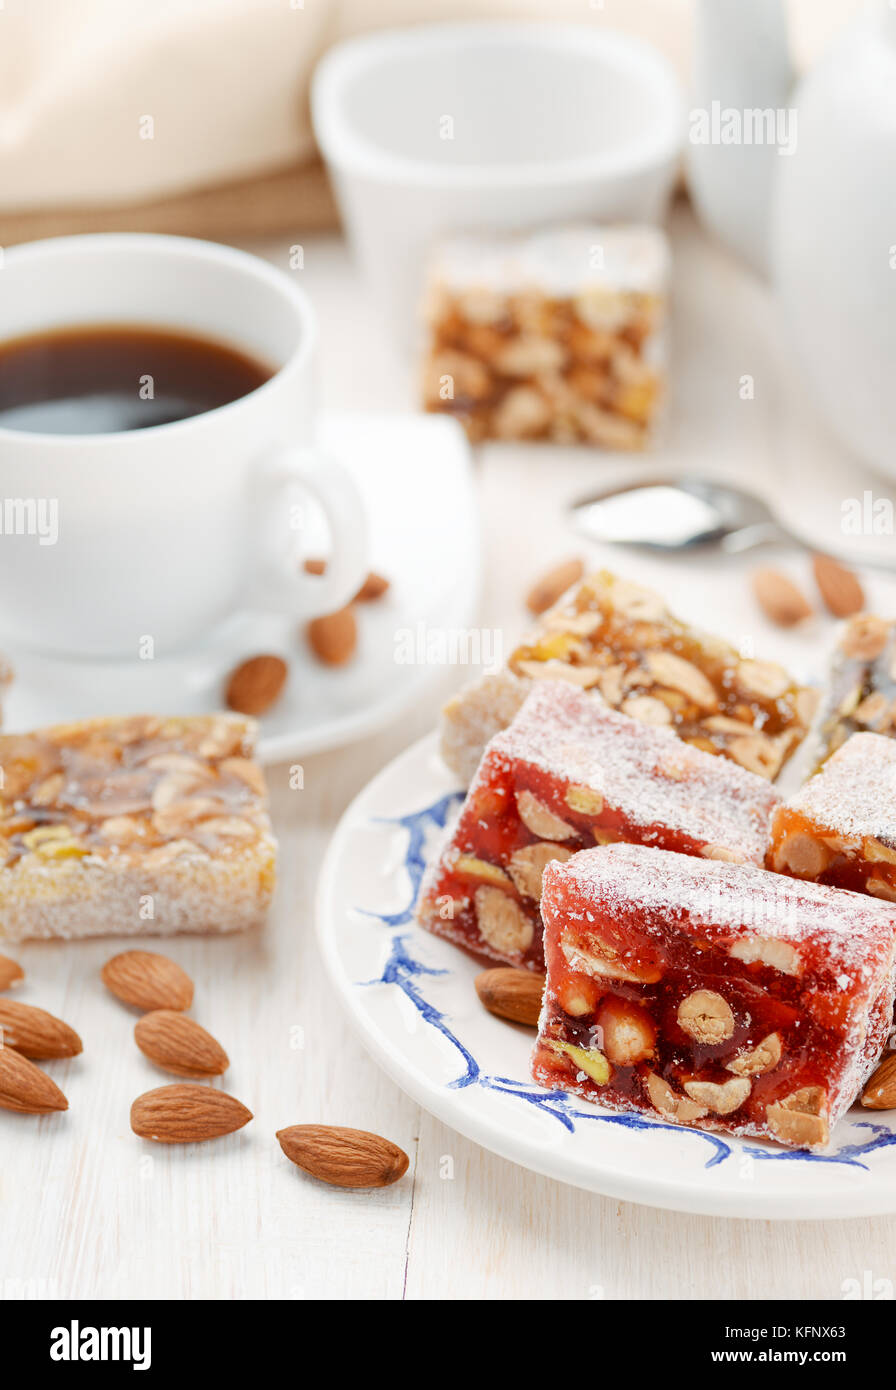 Still life with lokum delight and almonds Stock Photo